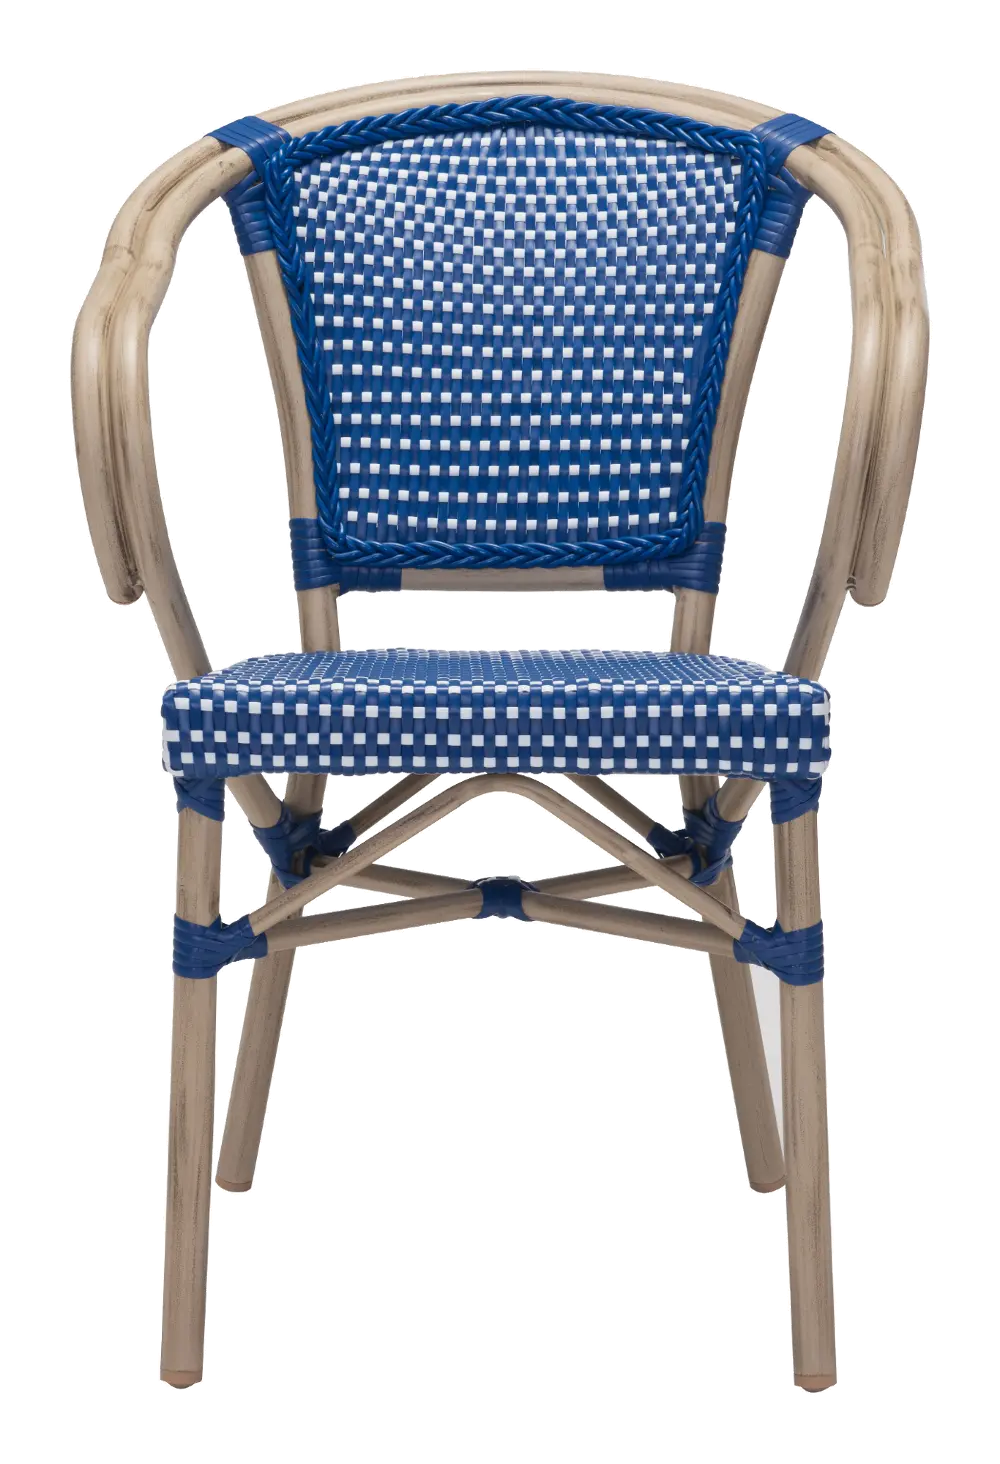 Set of 2 Blue and White Outdoor Patio Dining Chairs - Paris-1